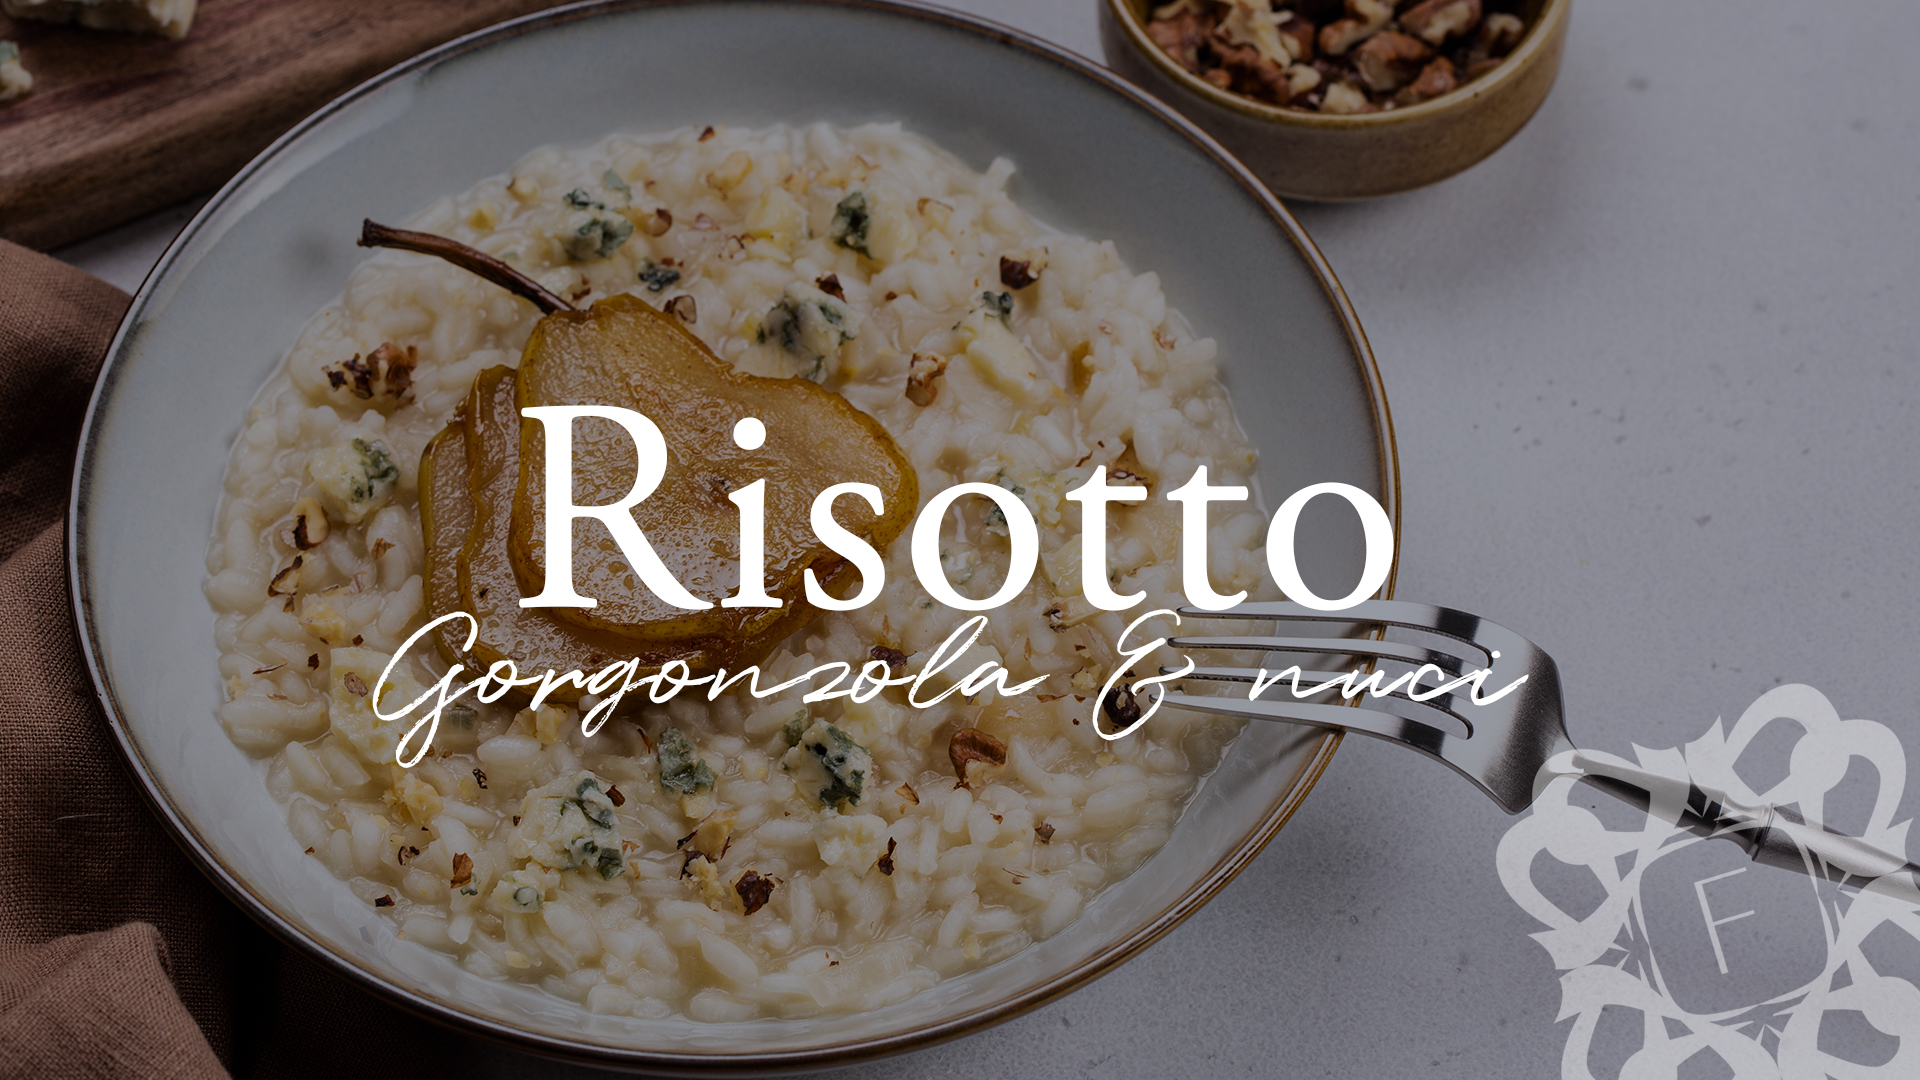 You are currently viewing Risotto cu Gorgonzola și nuci